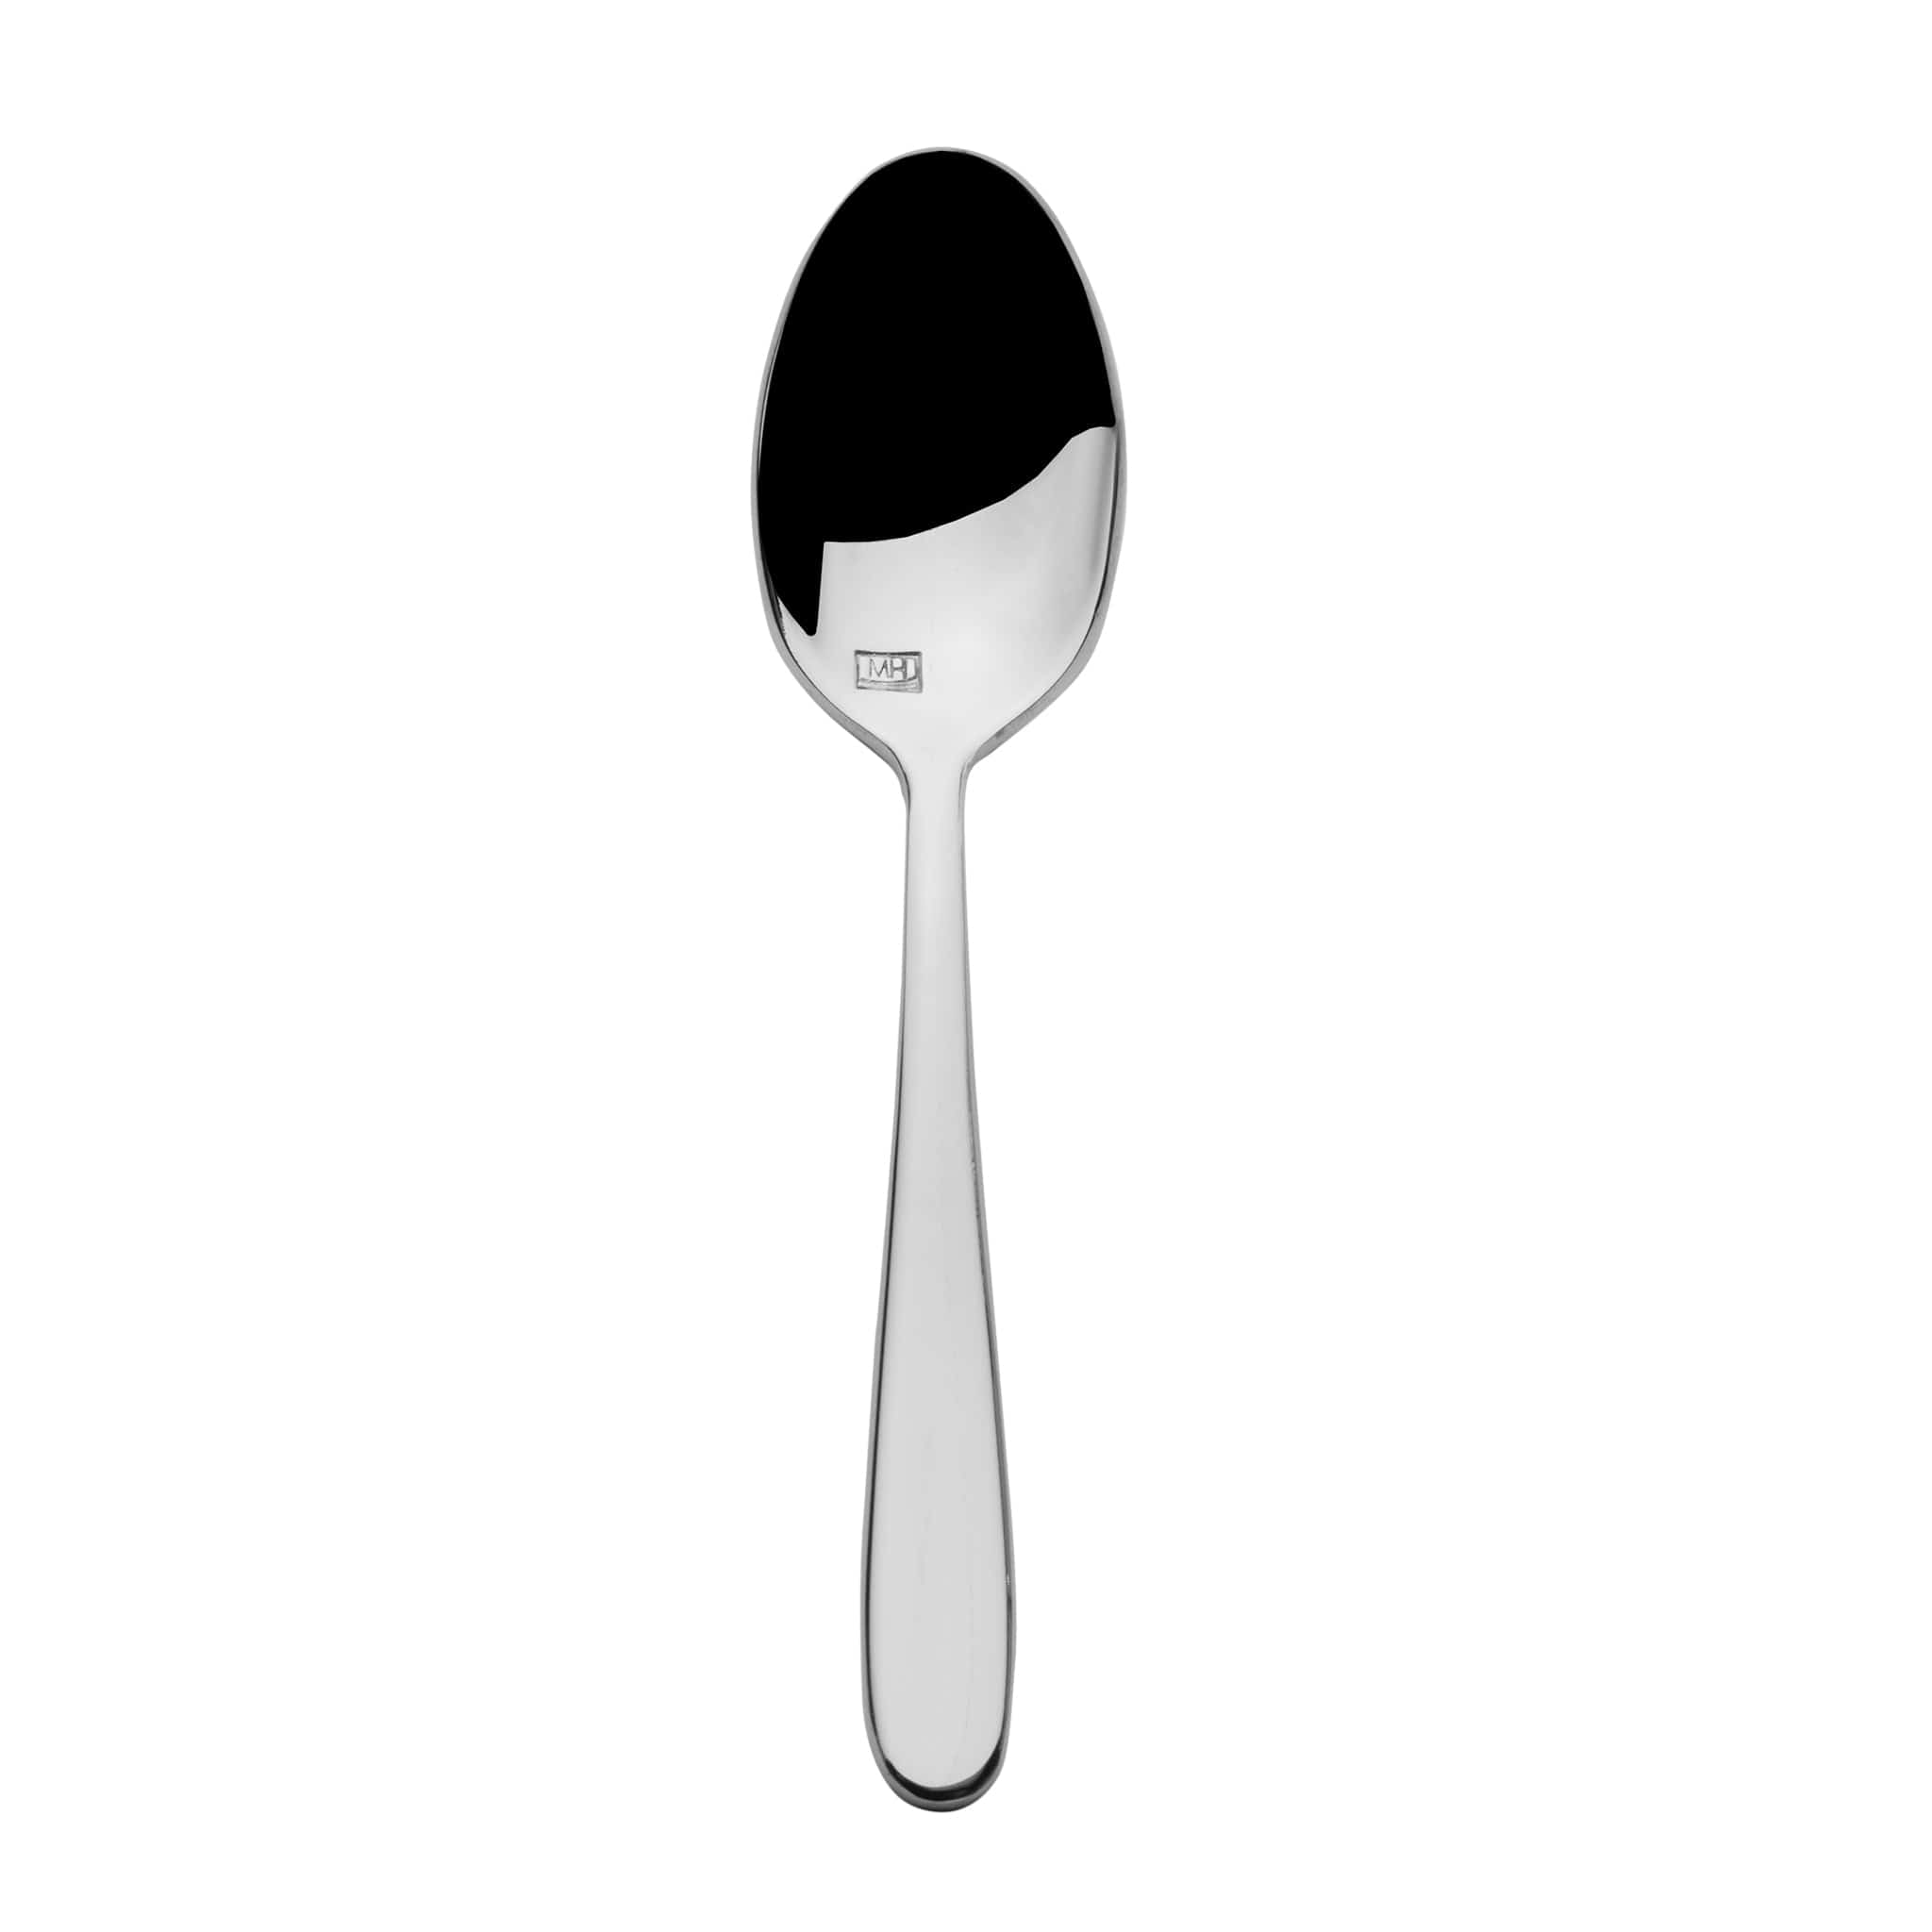 City Limit 18.10 Espresso Spoon 4.5" Stainless Steel